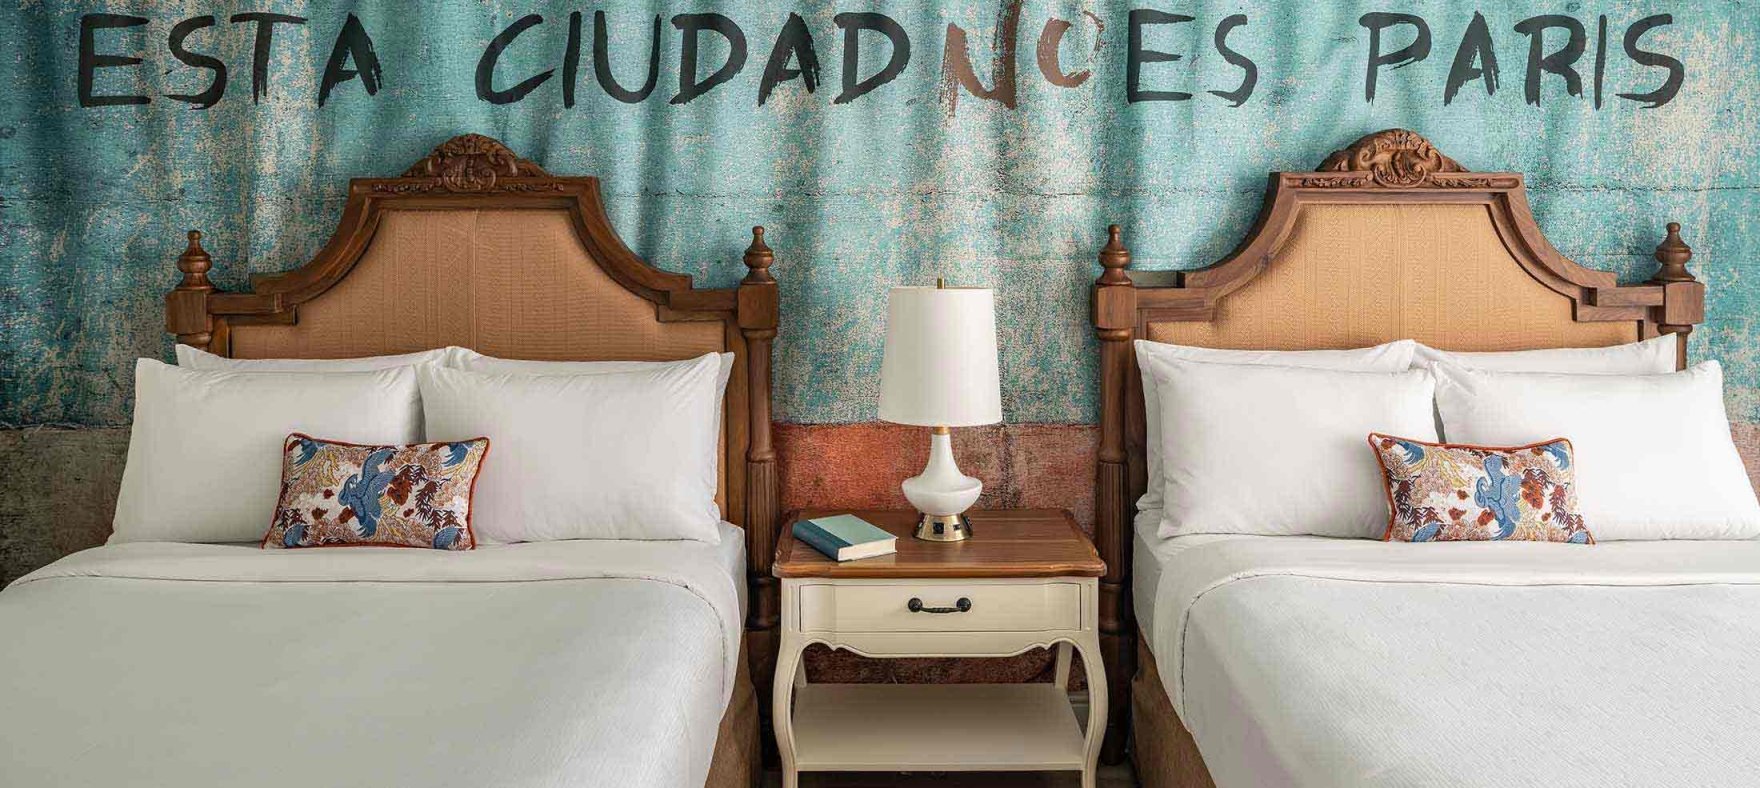 Two queen-side beds with a lamp placed on the shared bedside table in between